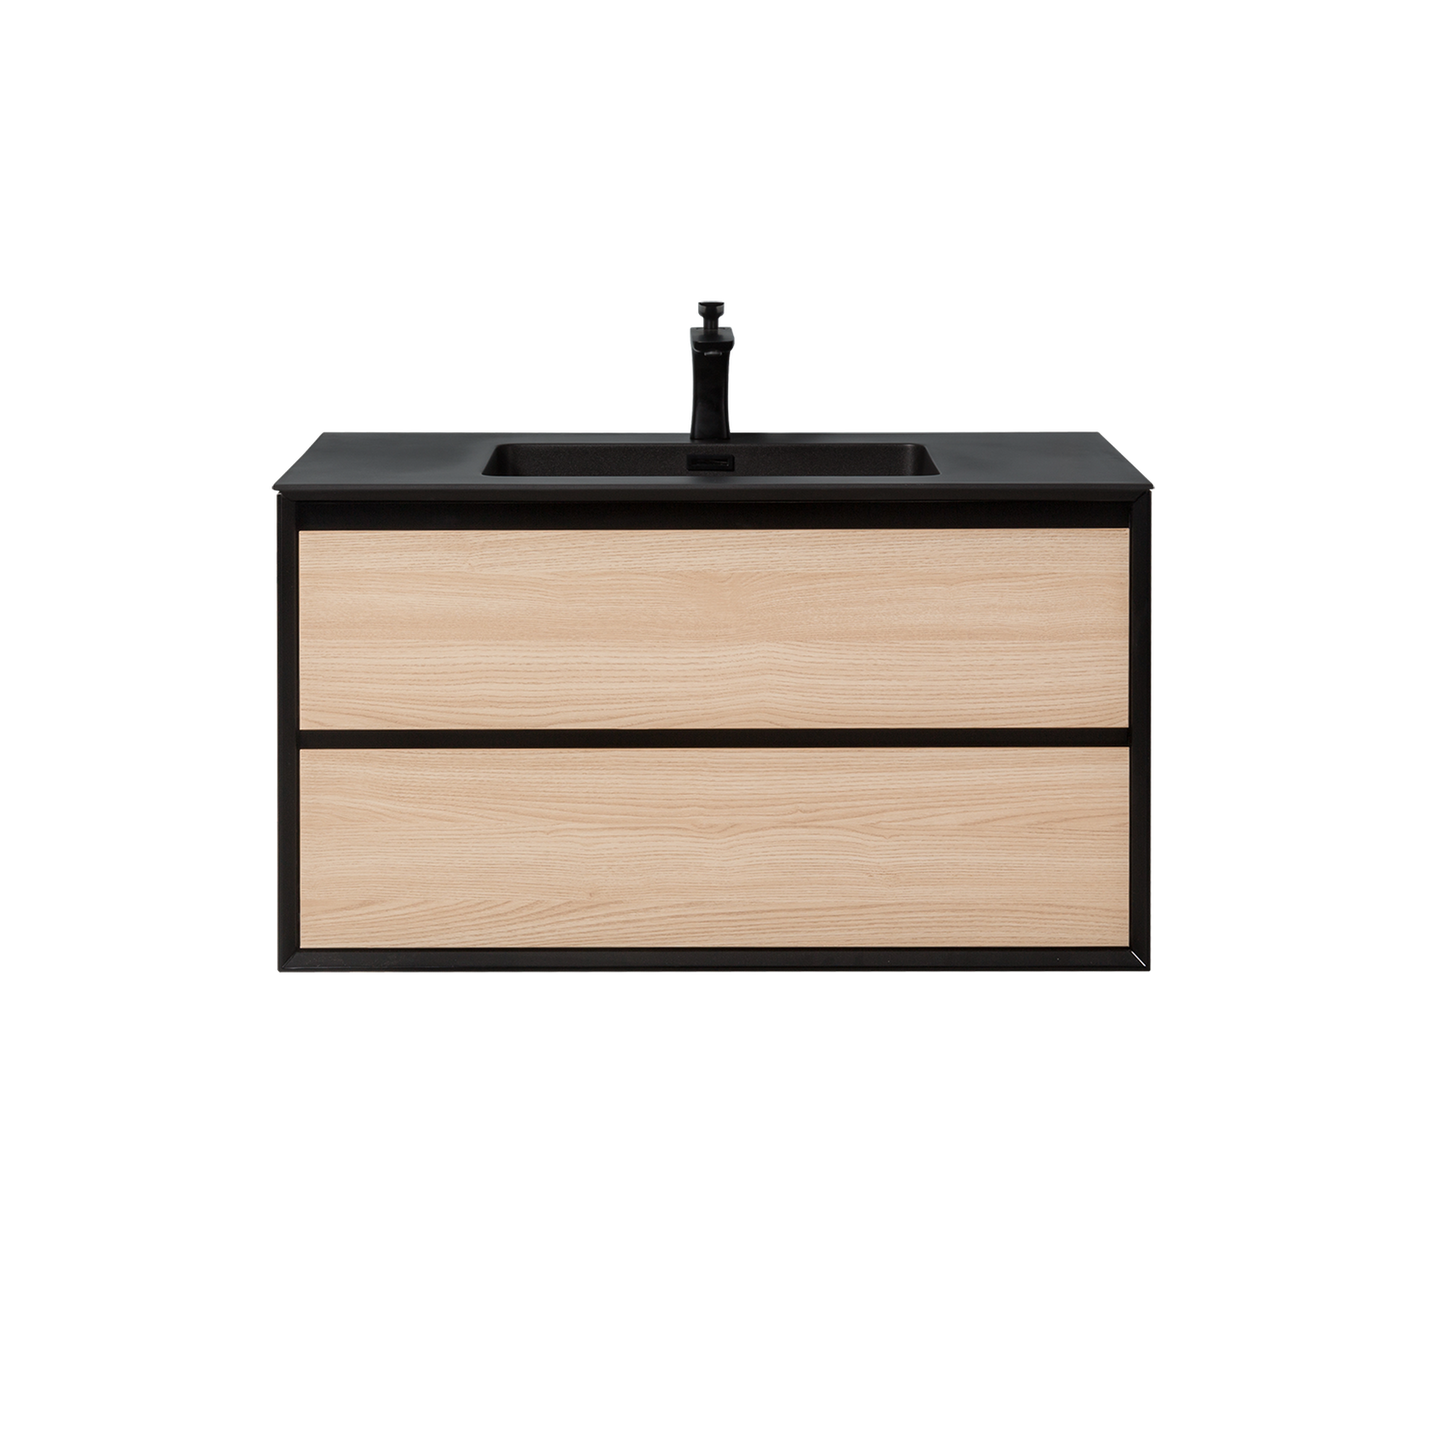 Duko Expect 36" With Black Single Basin and Drawer Cabinet Natural Oak Wooden Vanity Set